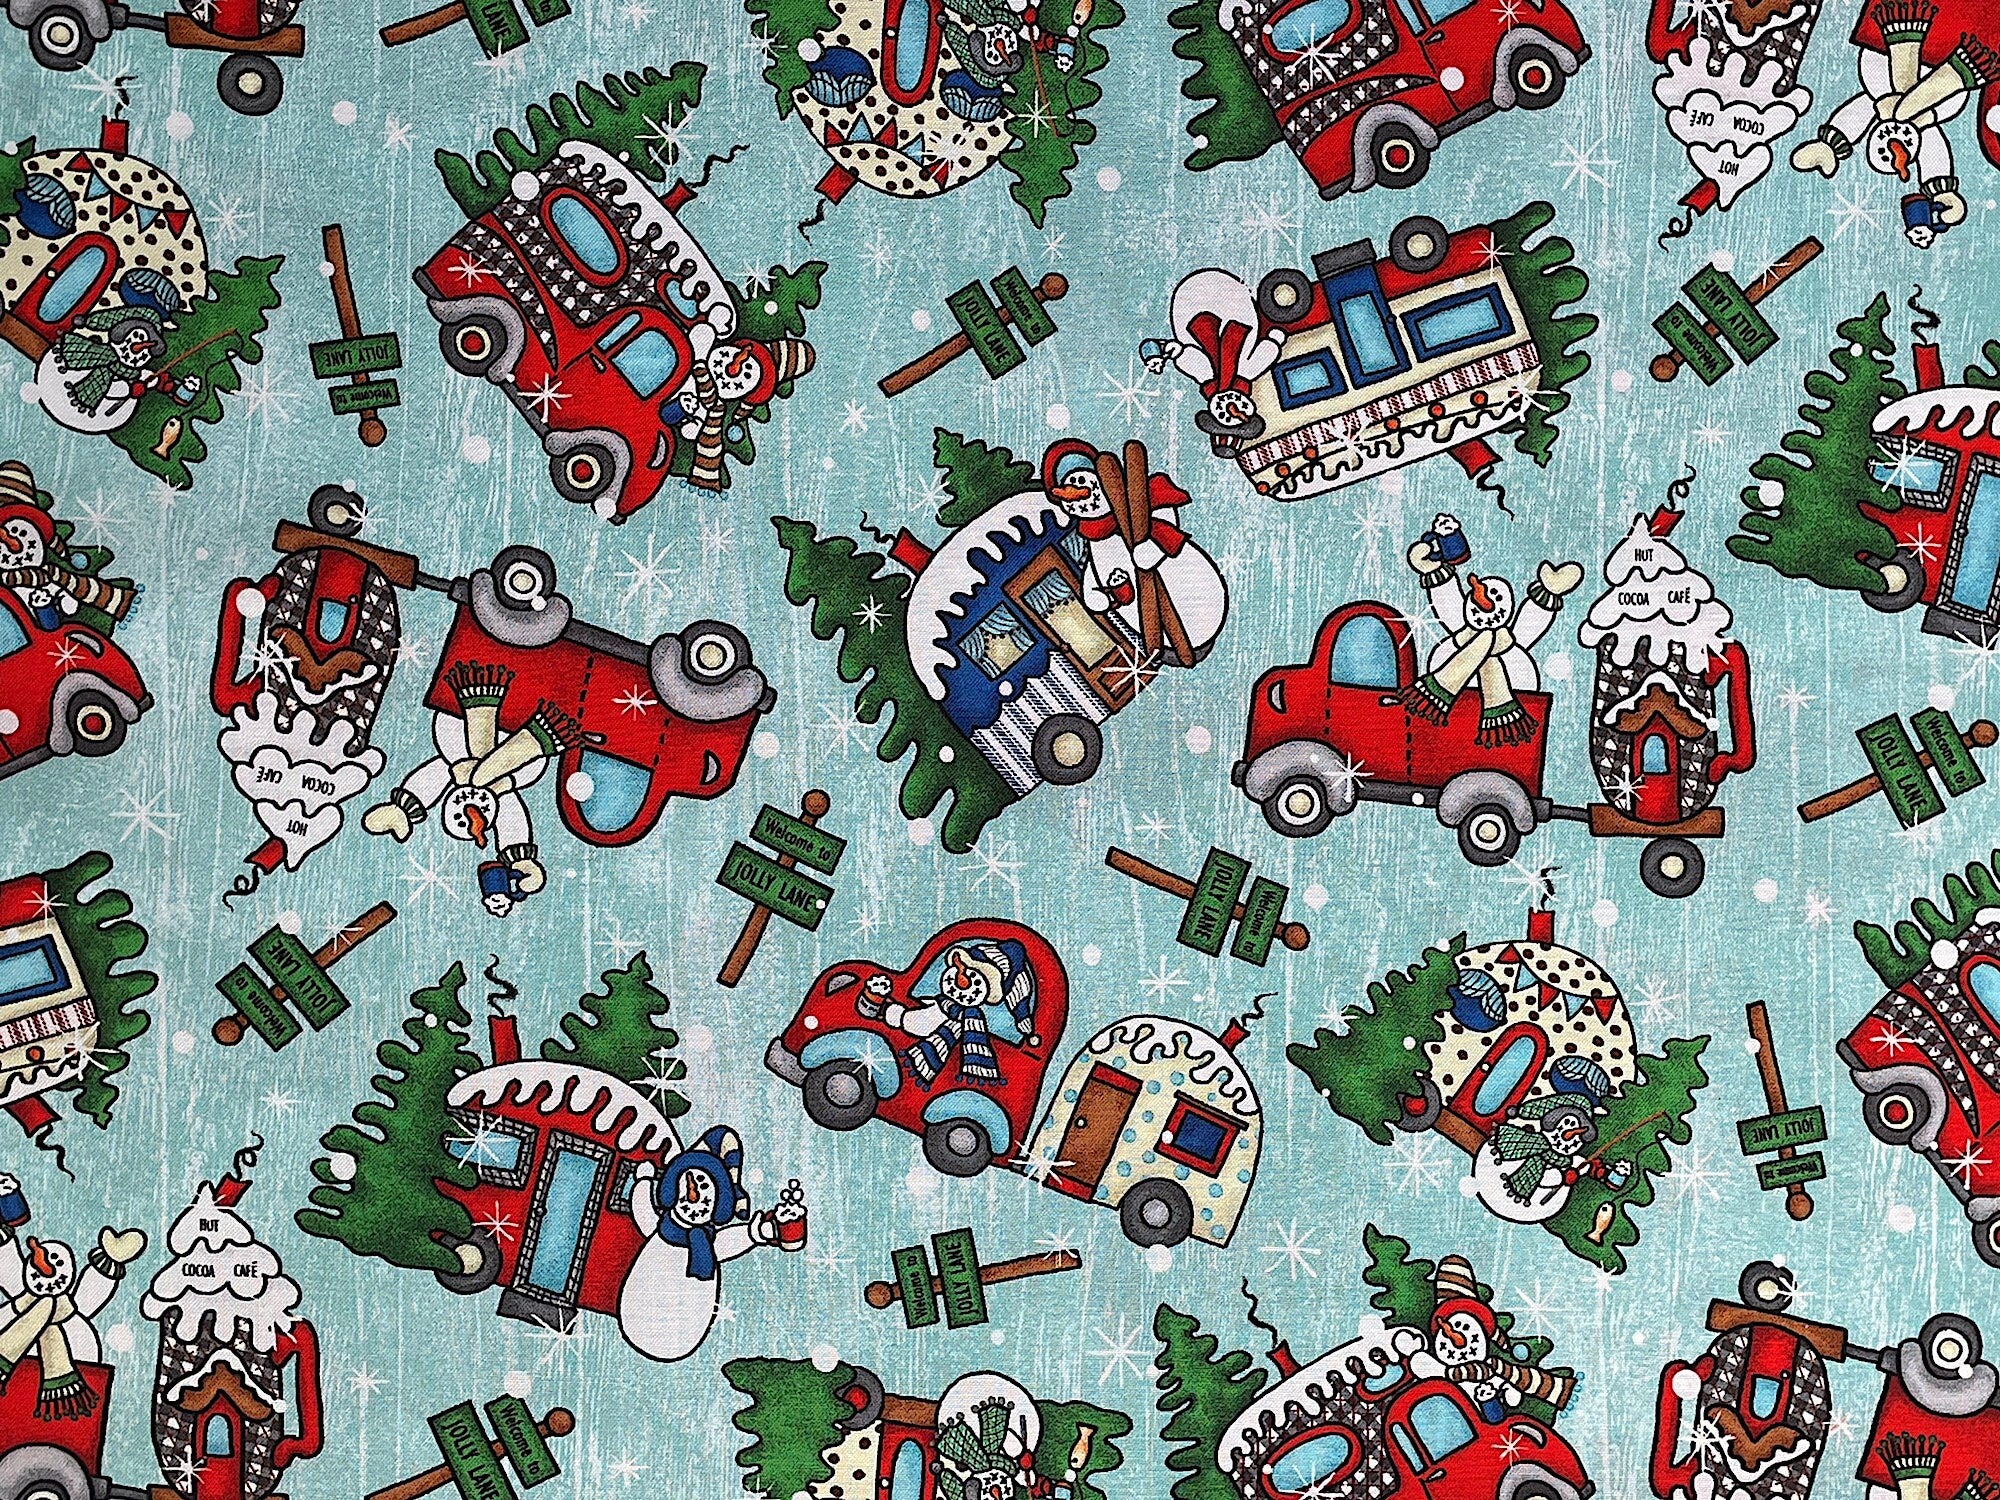 This cotton fabric is covered with snowmen, trees, travel trailers trucks and more. This fabric is called Jolly Lane and was designed by Pearl Krush.